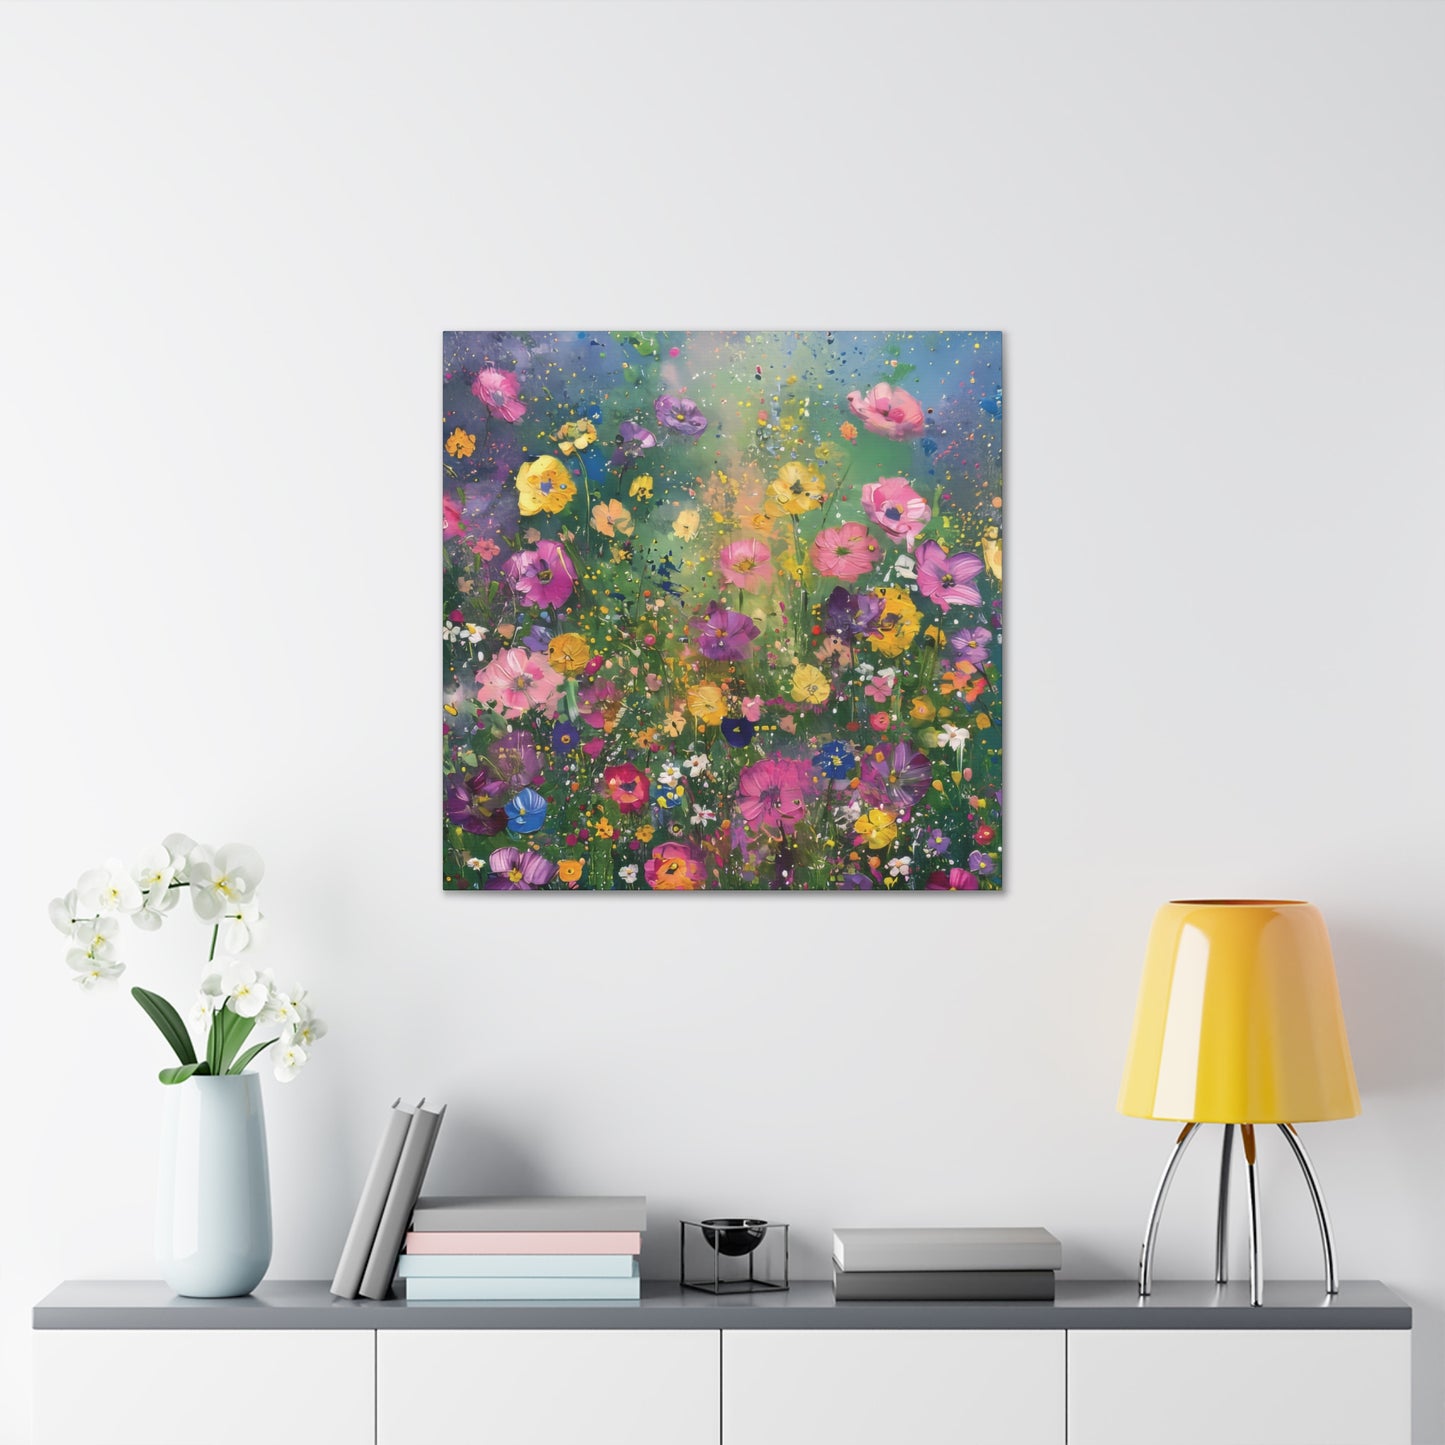 Field of Bright Spring Flowers Print on Canvas Gallery Wraps  - 5 Sizes